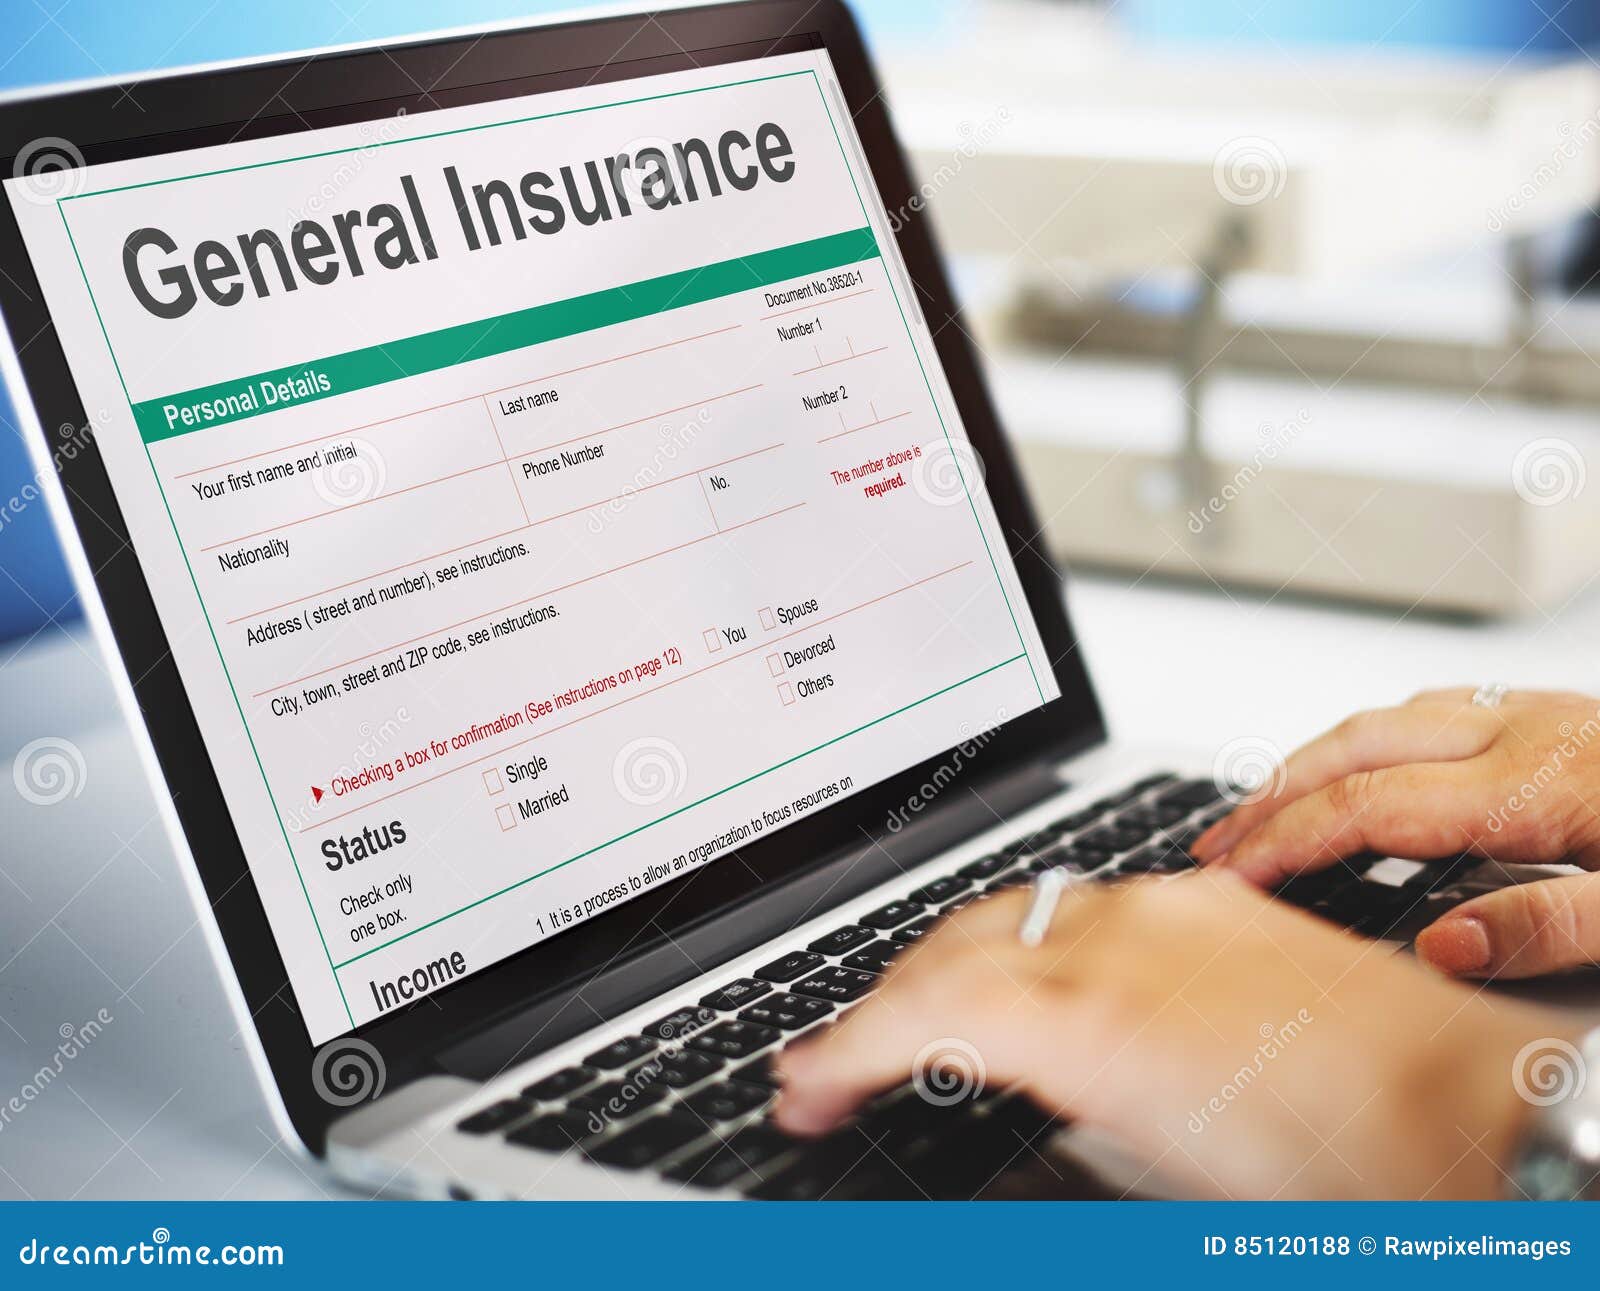 general-insurance-rebate-form-information-concept-stock-photo-image